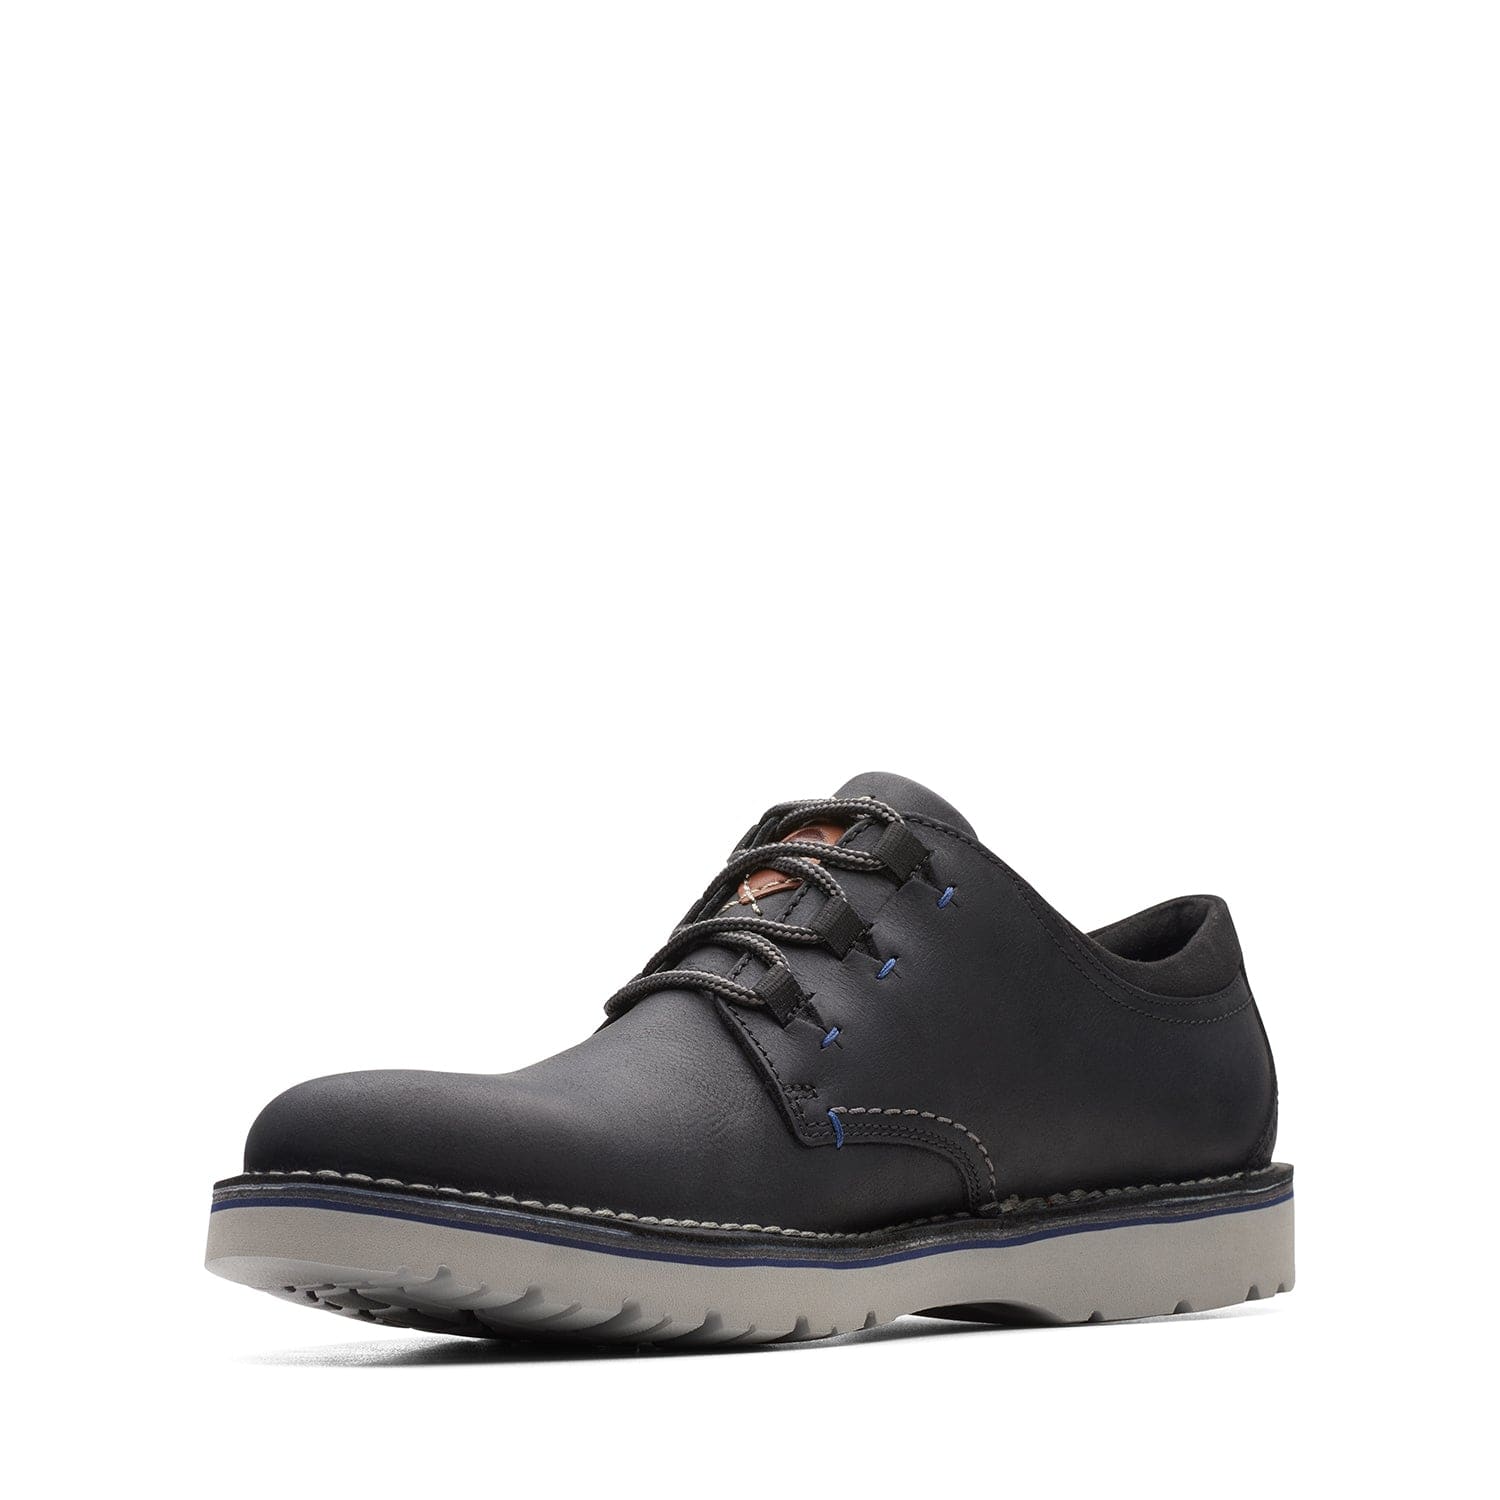 Clarks Eastford Low Shoes - Black Leather - 261629197 - G Width (Standard Fit)